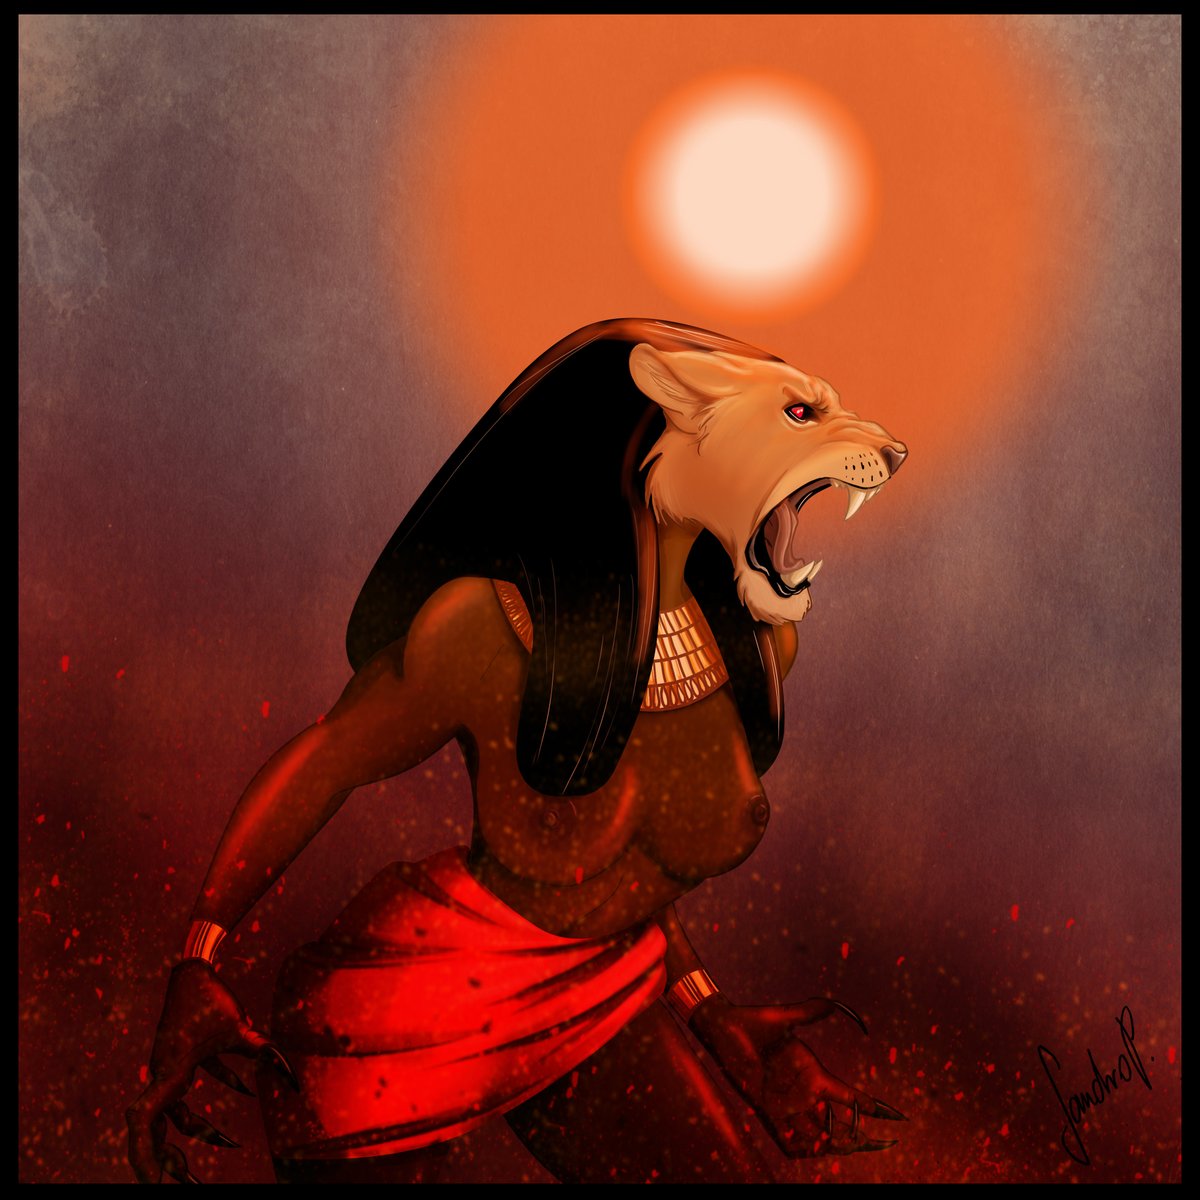 'Queen of Plagues'

I wonder, if we were #ancientegyptians, would we pray to #Sekhmet during this modern plague?

#MythologyMonday #History #Egyptology #Africa #Lionessess